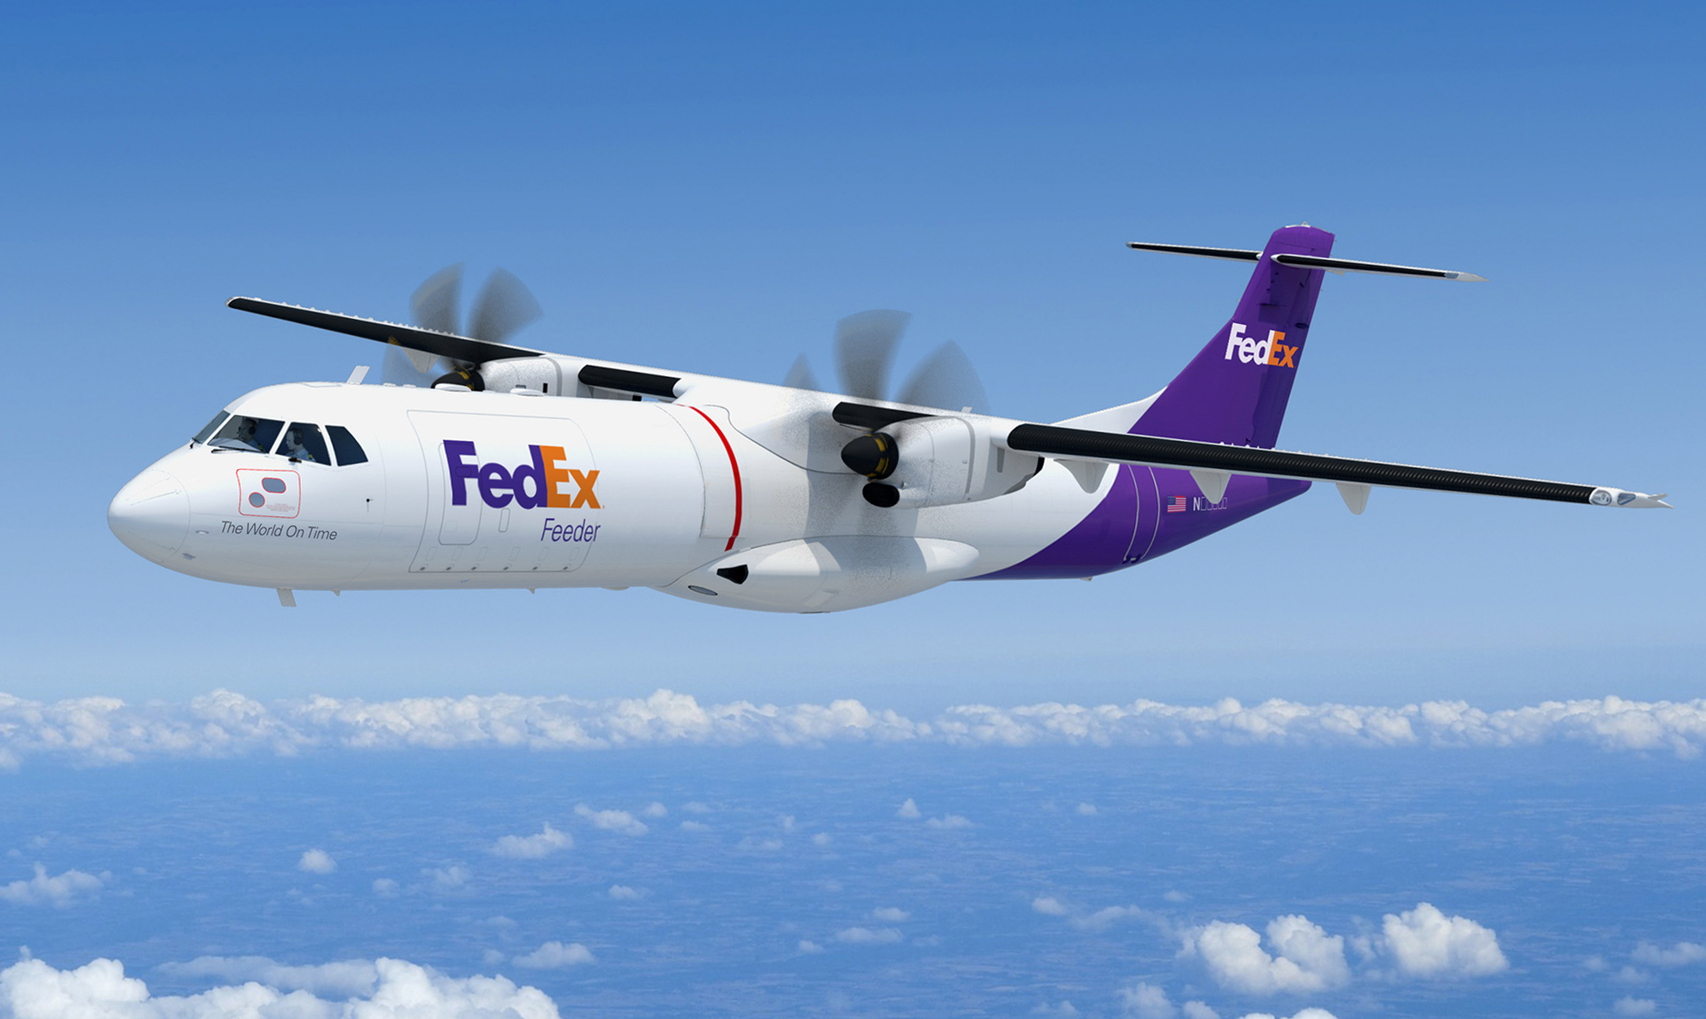 FedEx Express has signed a major contract with ATR for the firm purchase of 30 ATR 72-600Fs plus 20 options. The aircraft will be the first new ATRs to be directly delivered from the factory in a freighter configuration. This new aircraft version, designated as the ATR 72-600F, has a brand new windowless fuselage and is equipped with a forward Large Cargo Door (LCD) and a rear upper hinged cargo door. Click to enlarge.